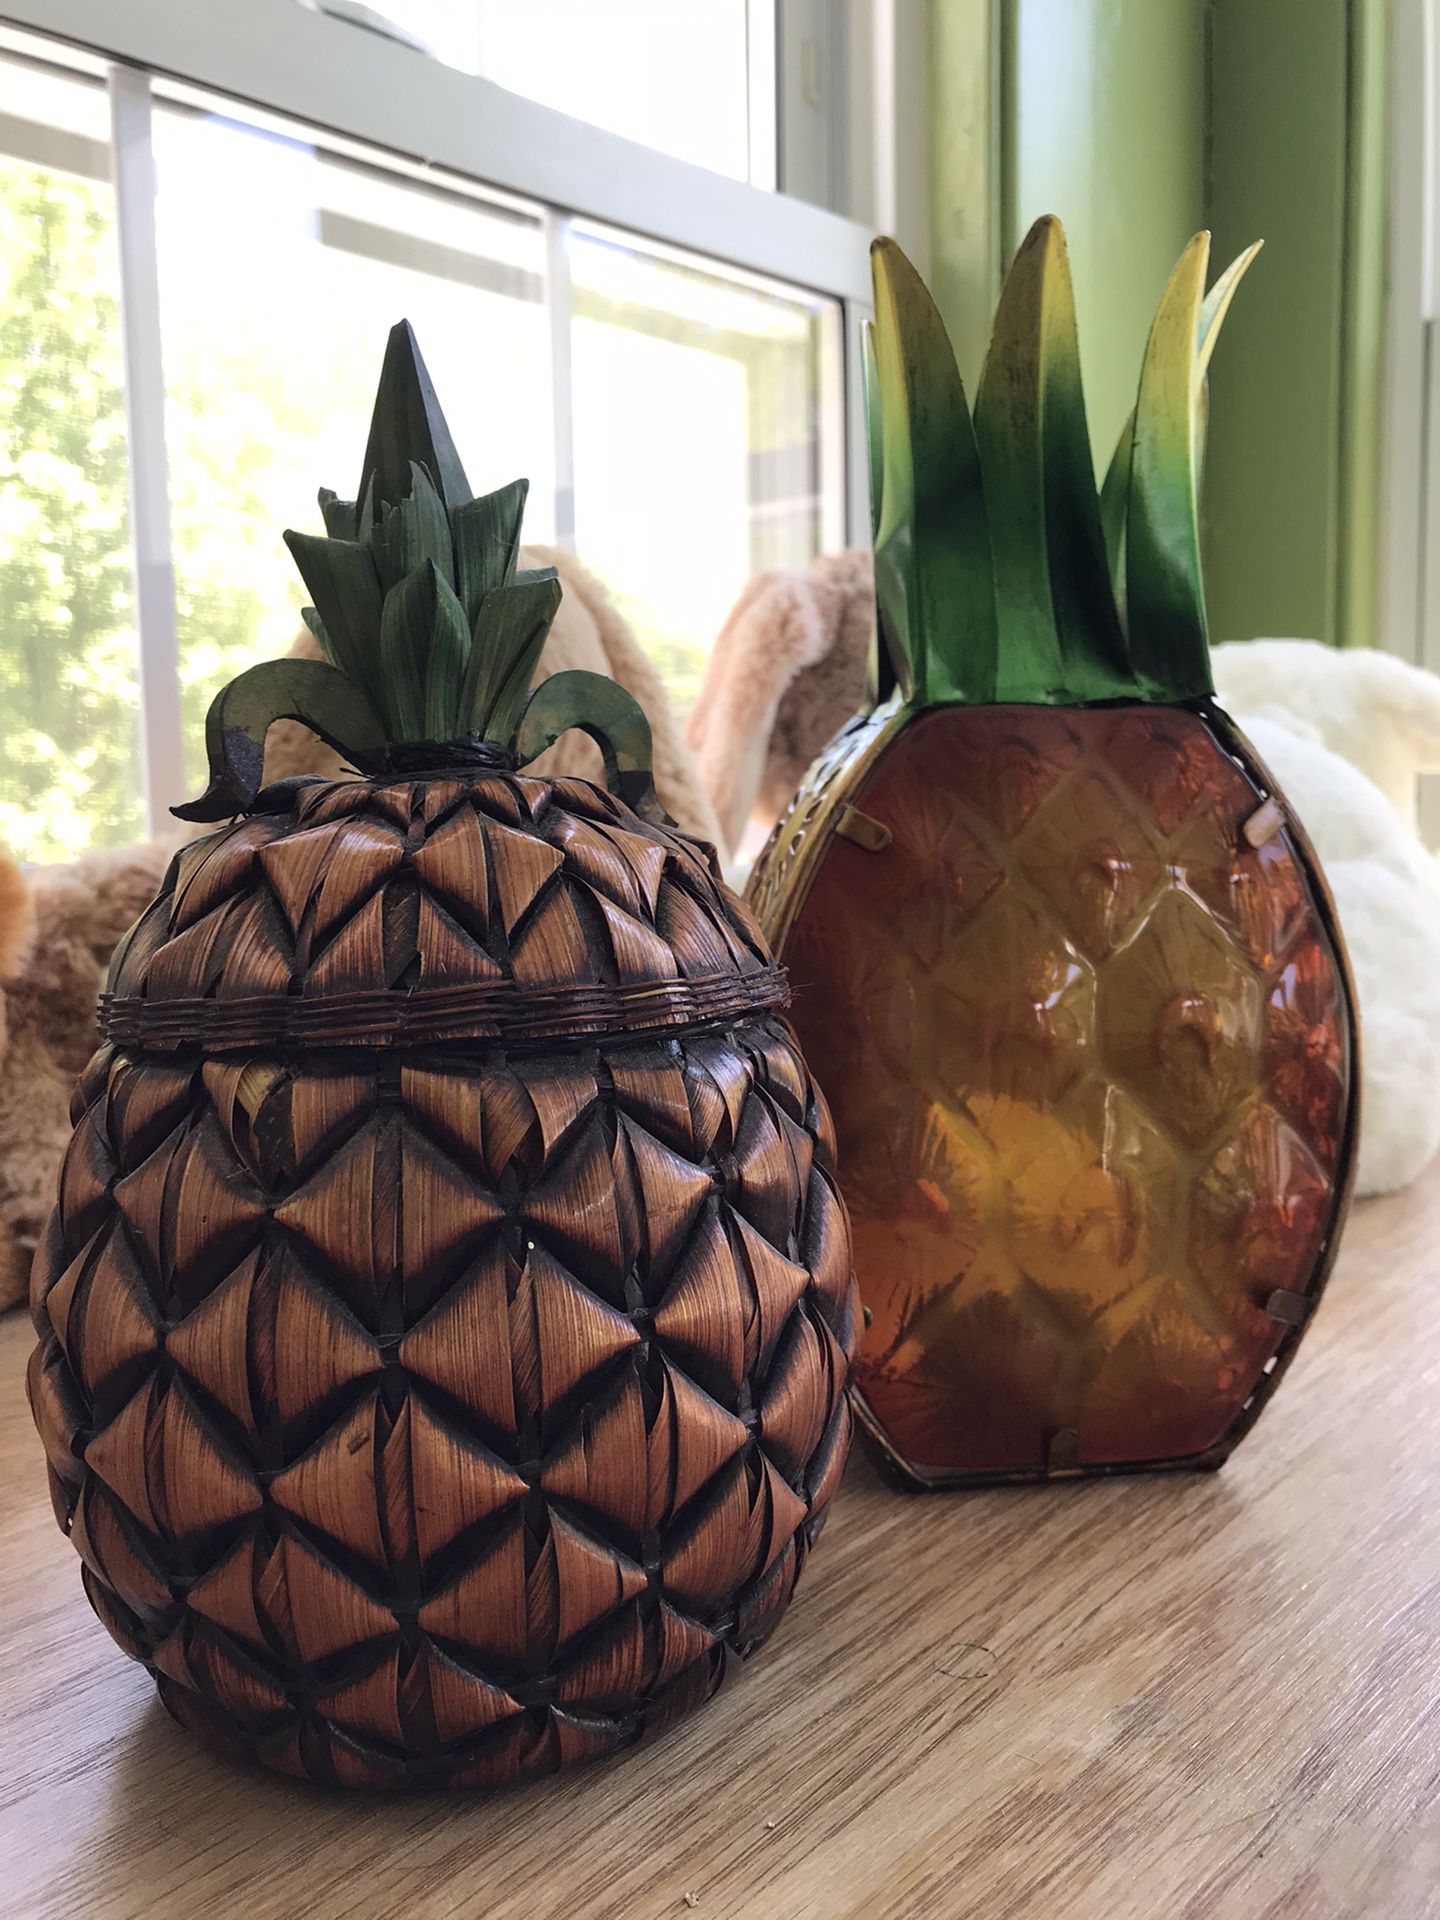 Pineapple basket and candle holder